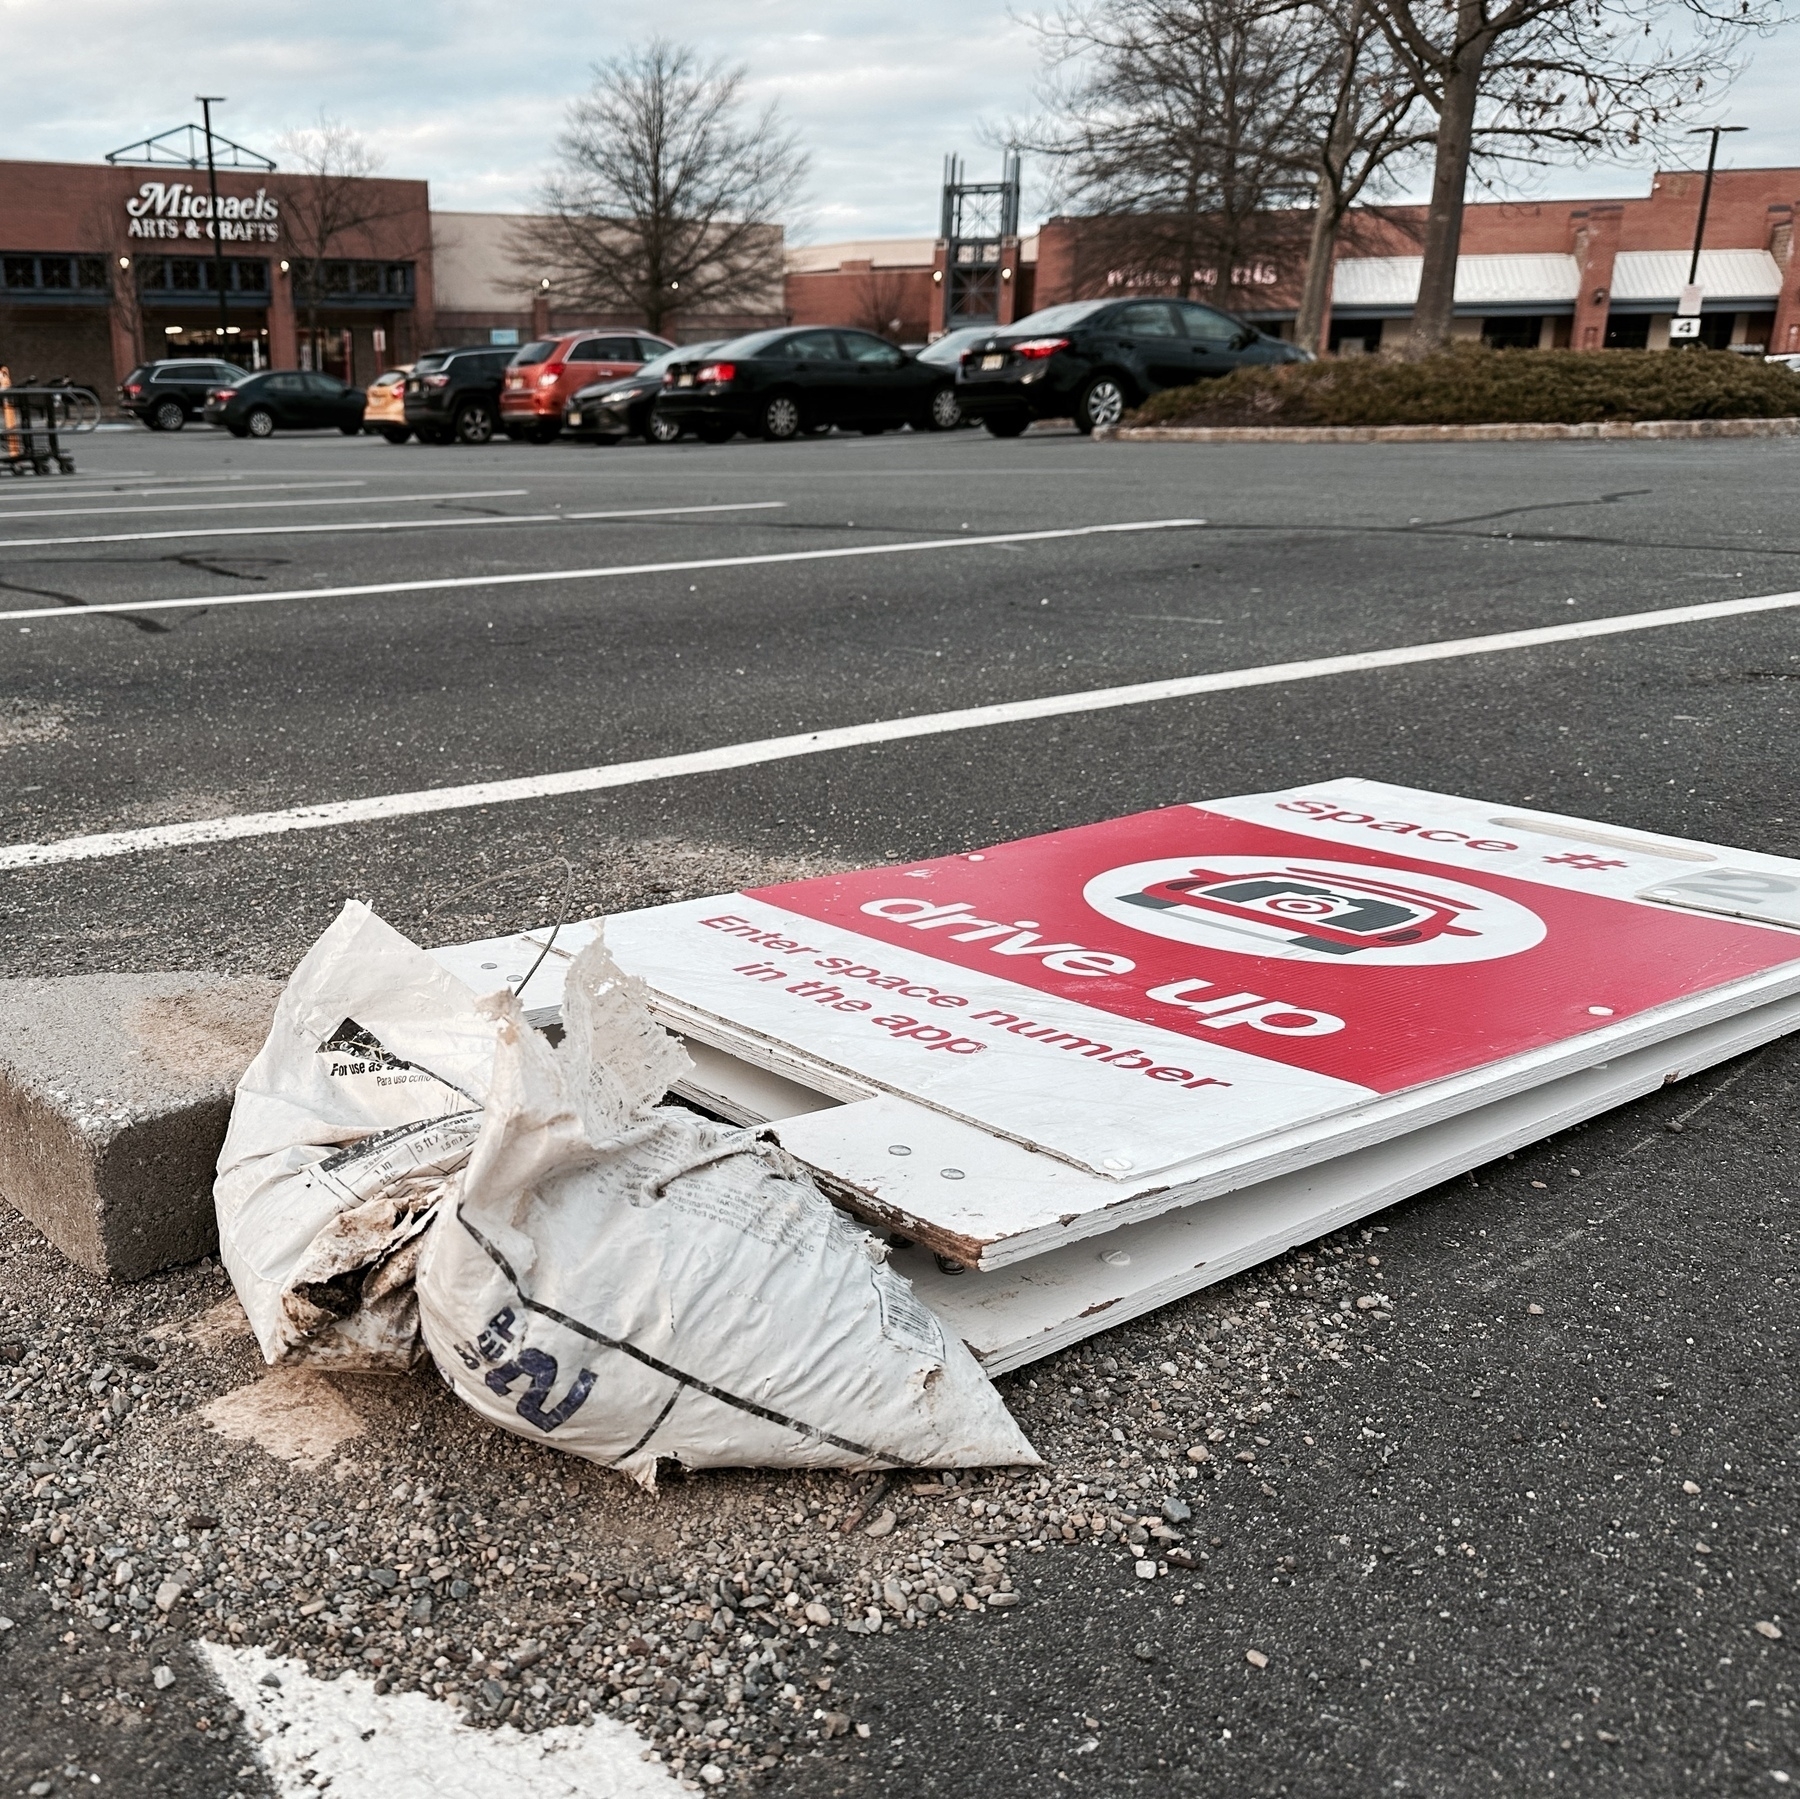 Photograph of Target store drive-up order pickup sign, tipped over on the pavement